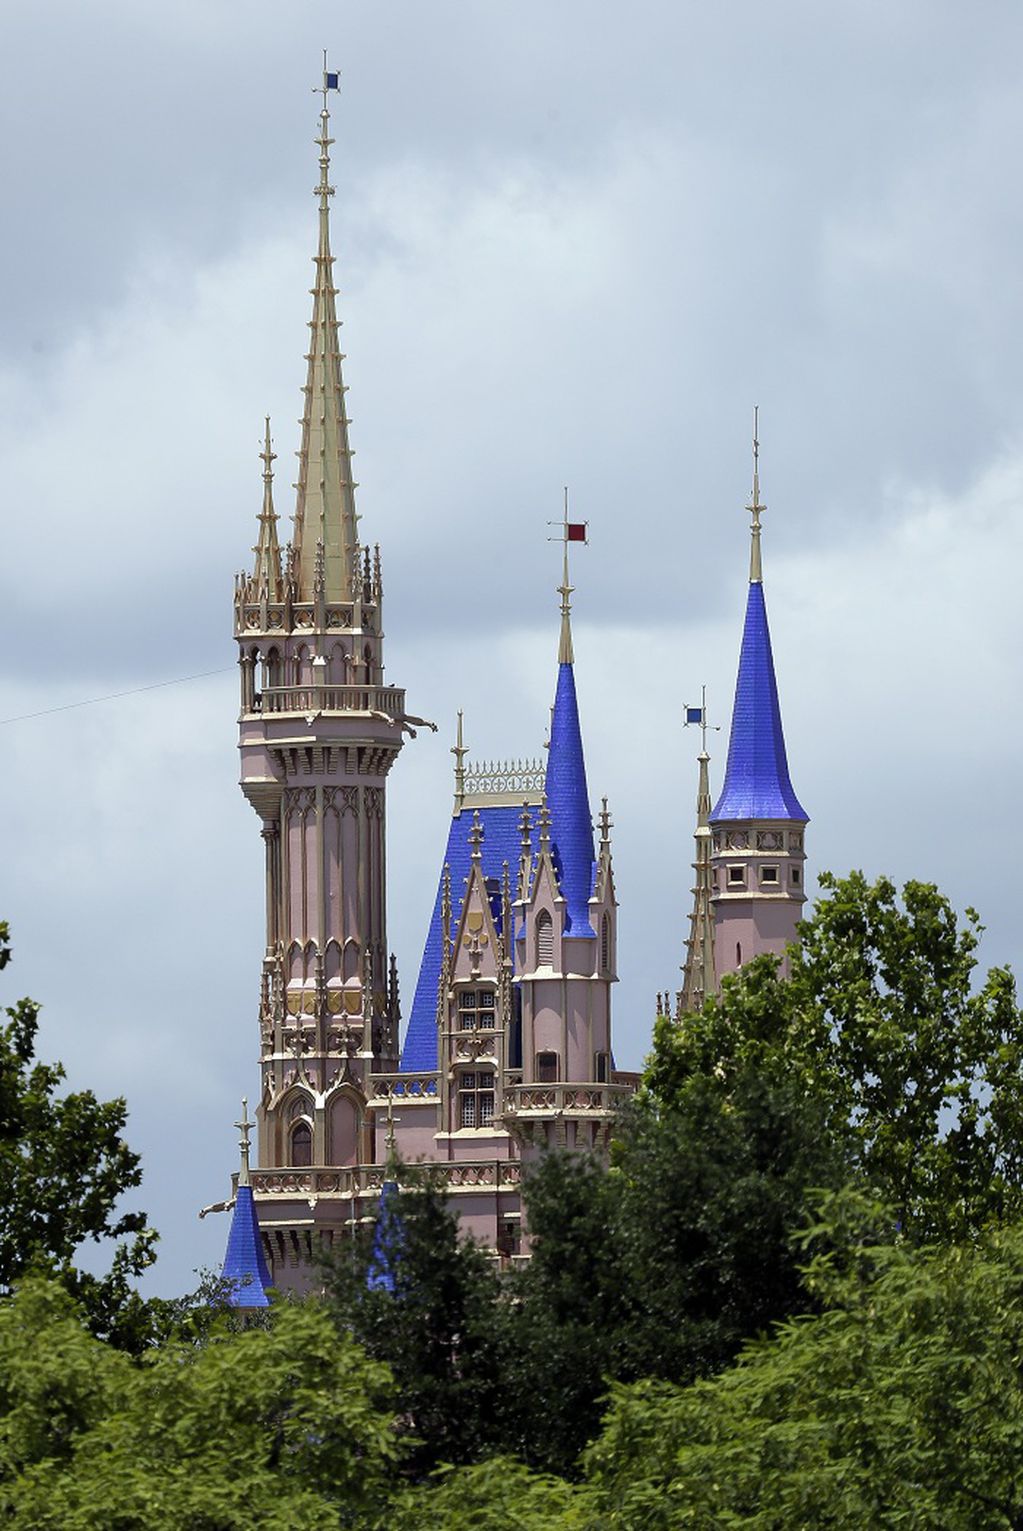 This photo shows the top of the newly painted Cinderella Castle in the Magic Kingdom from World Drive at Walt Disney World on Thursday, July 2, 2020, in Lake Buena Vista, Fla. Magic Kingdom and Animal Kingdom will reopen on July 11. Disney World's other two parks, Epcot and Disney's Hollywood Studios, will welcome back guests four days later. (AP Photo/John Raoux)